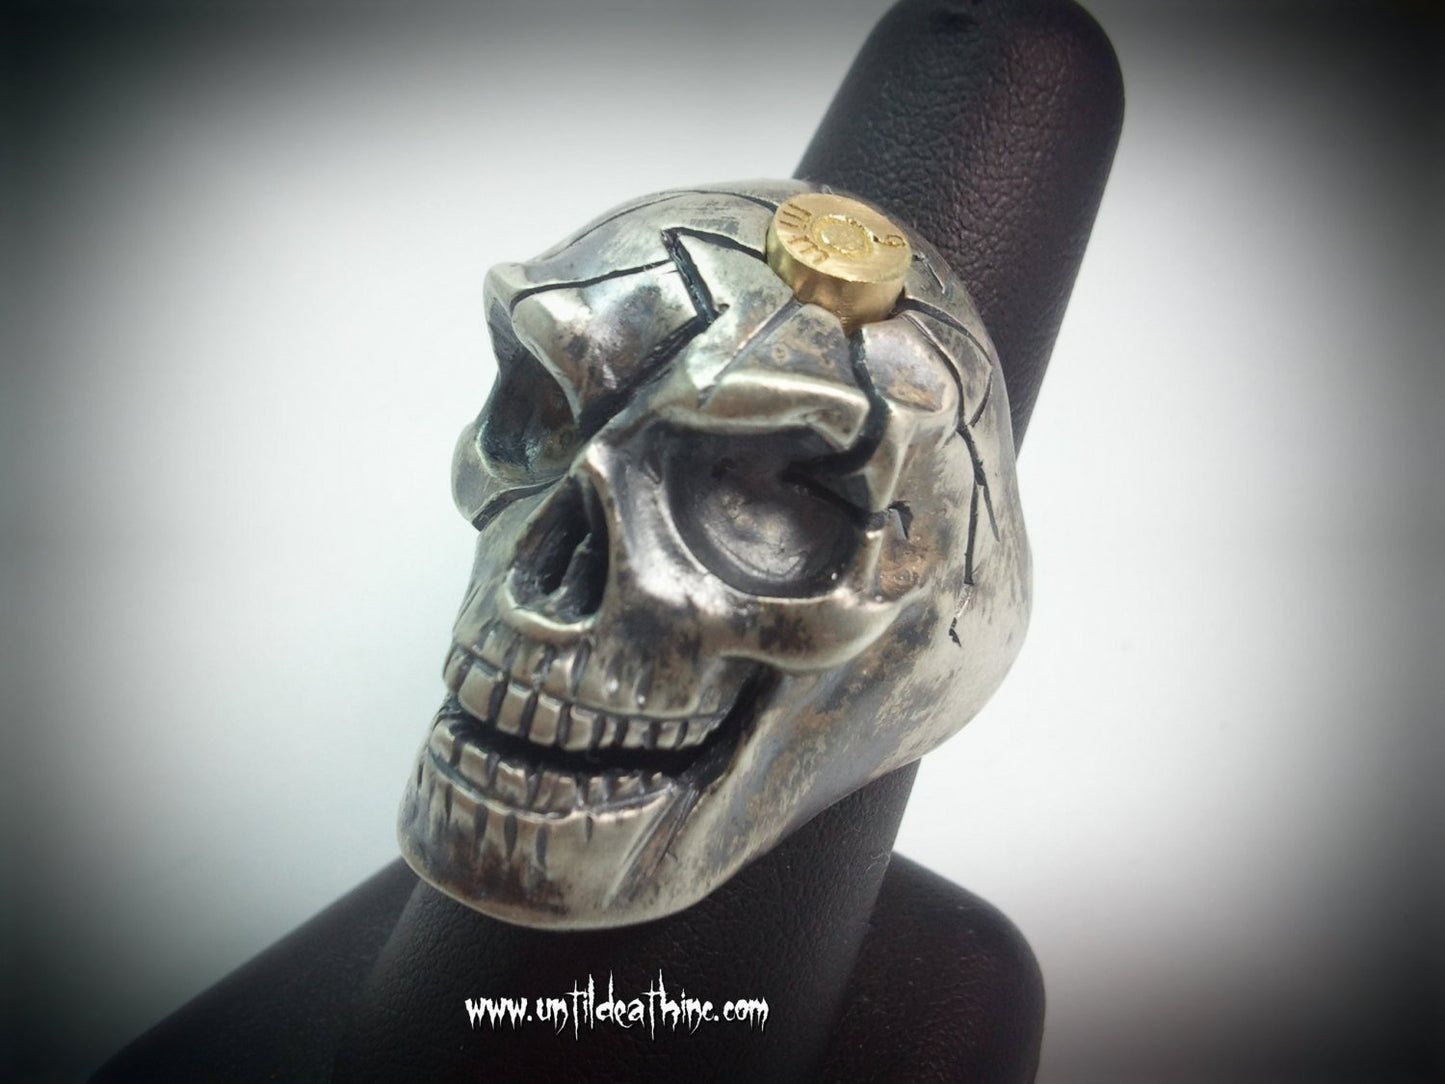 Big Daddy cracked skull with 9mm cartrage in Head in Sterling Silver -UDINC008